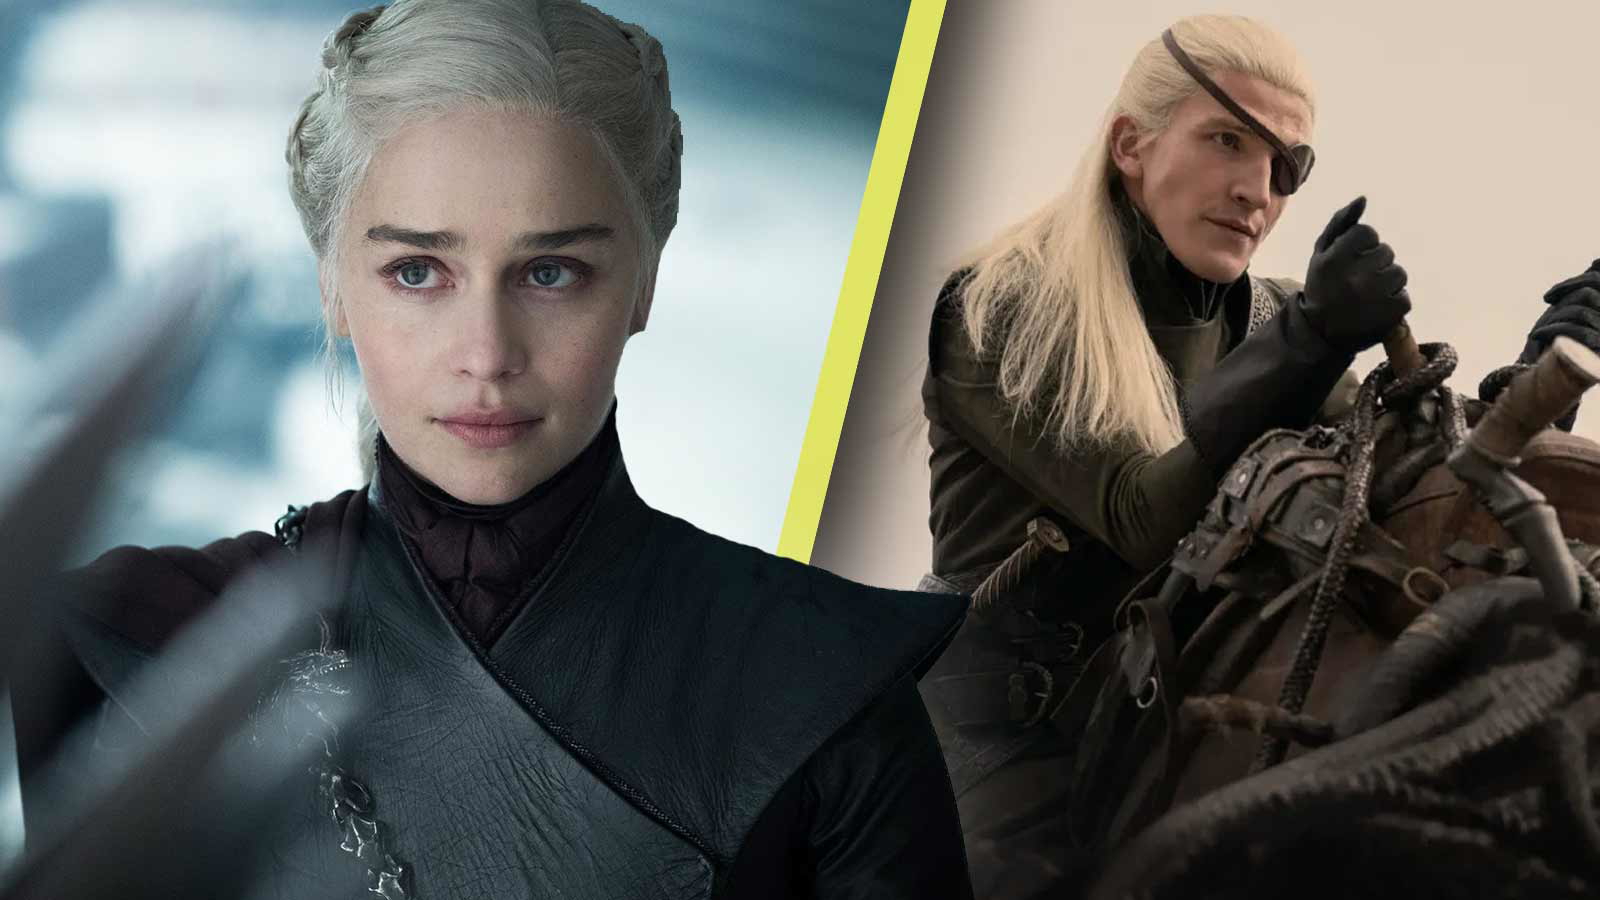 ‘House of the Dragon’ Teases a Repeat of Emilia Clarke’s Season 8 Scene from ‘Game of Thrones’ That Had Fans in a Chokehold